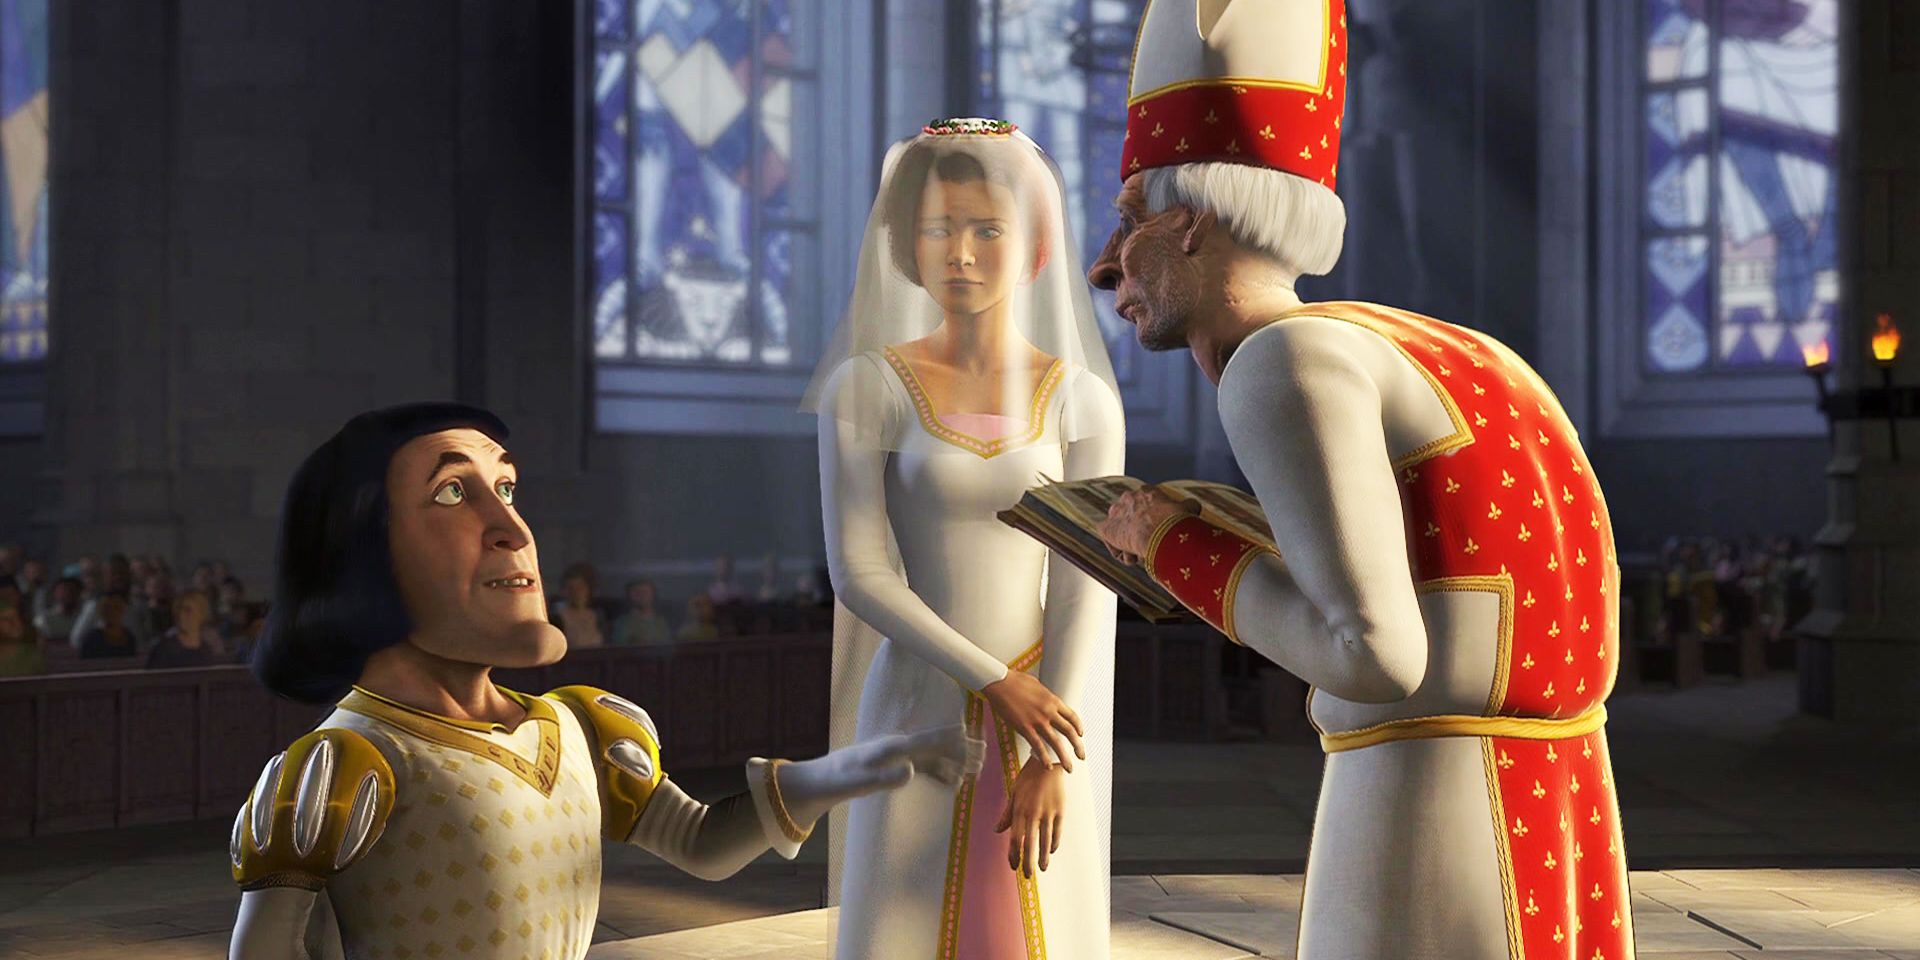 Shrek Lord Farquaad and Fiona at the later during their wedding